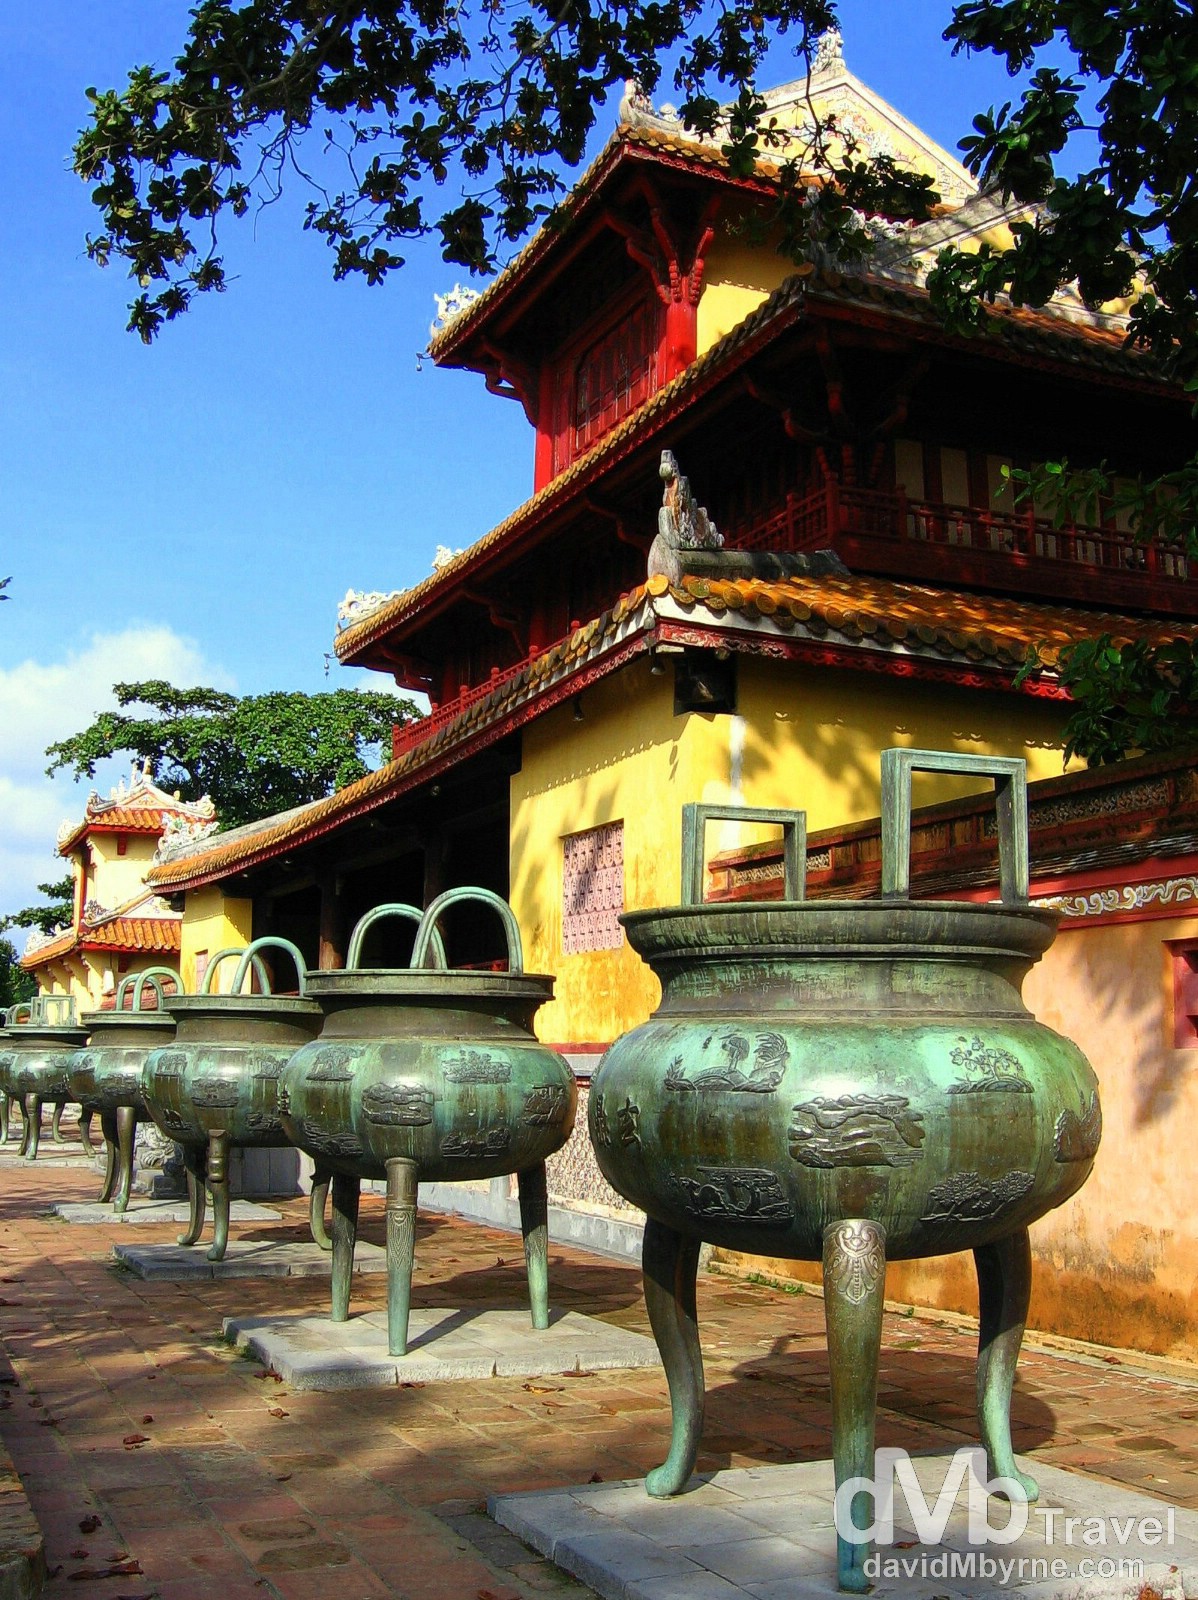 Some of the 9 Dynastic Urns of the UNESCO-listed Citadel in Hue, Central Vietnam. September 7th, 2005.